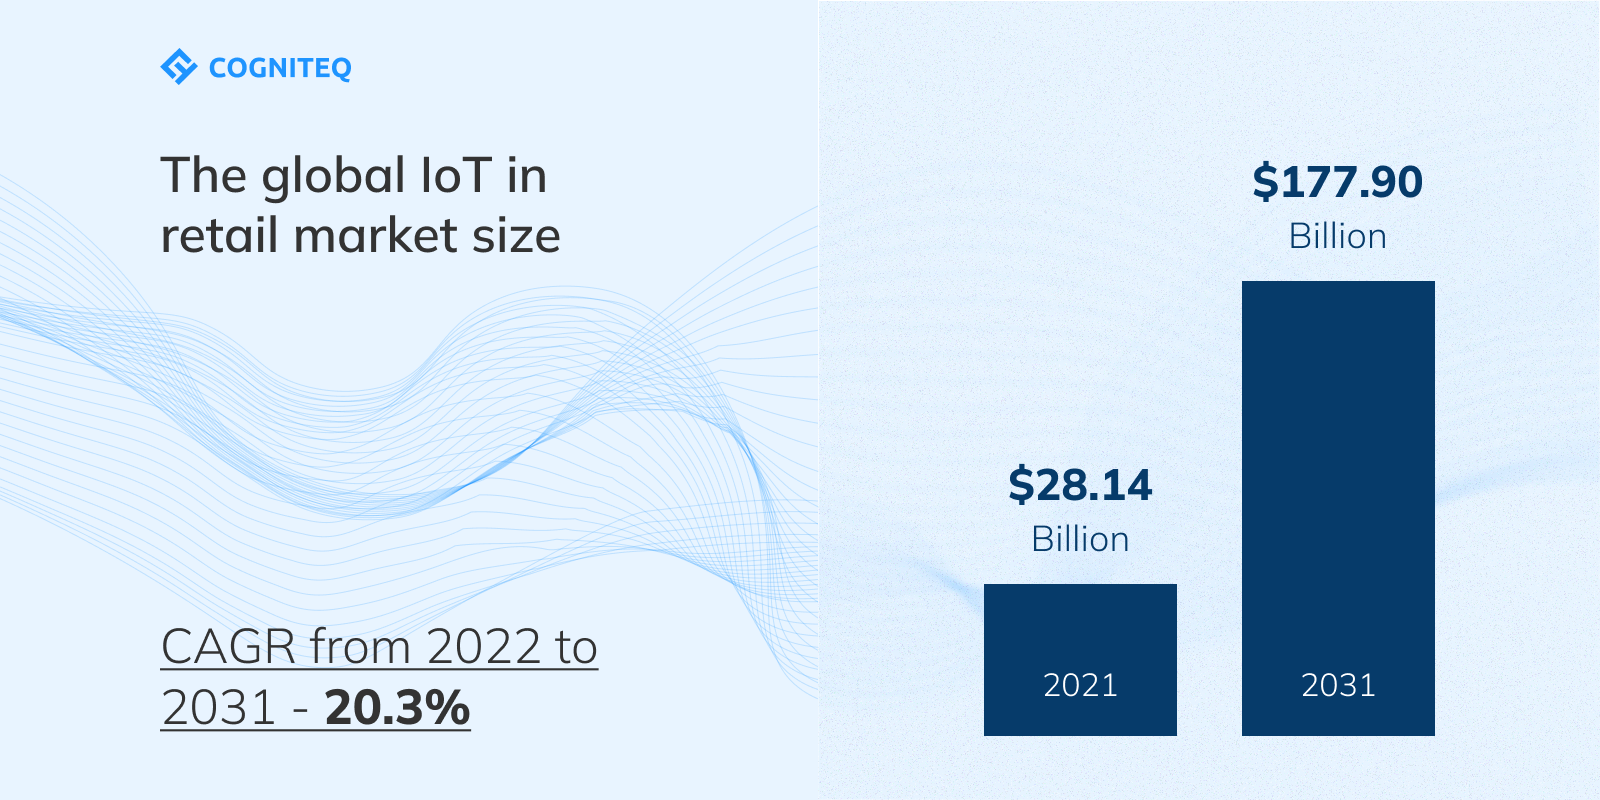 Iot in retail